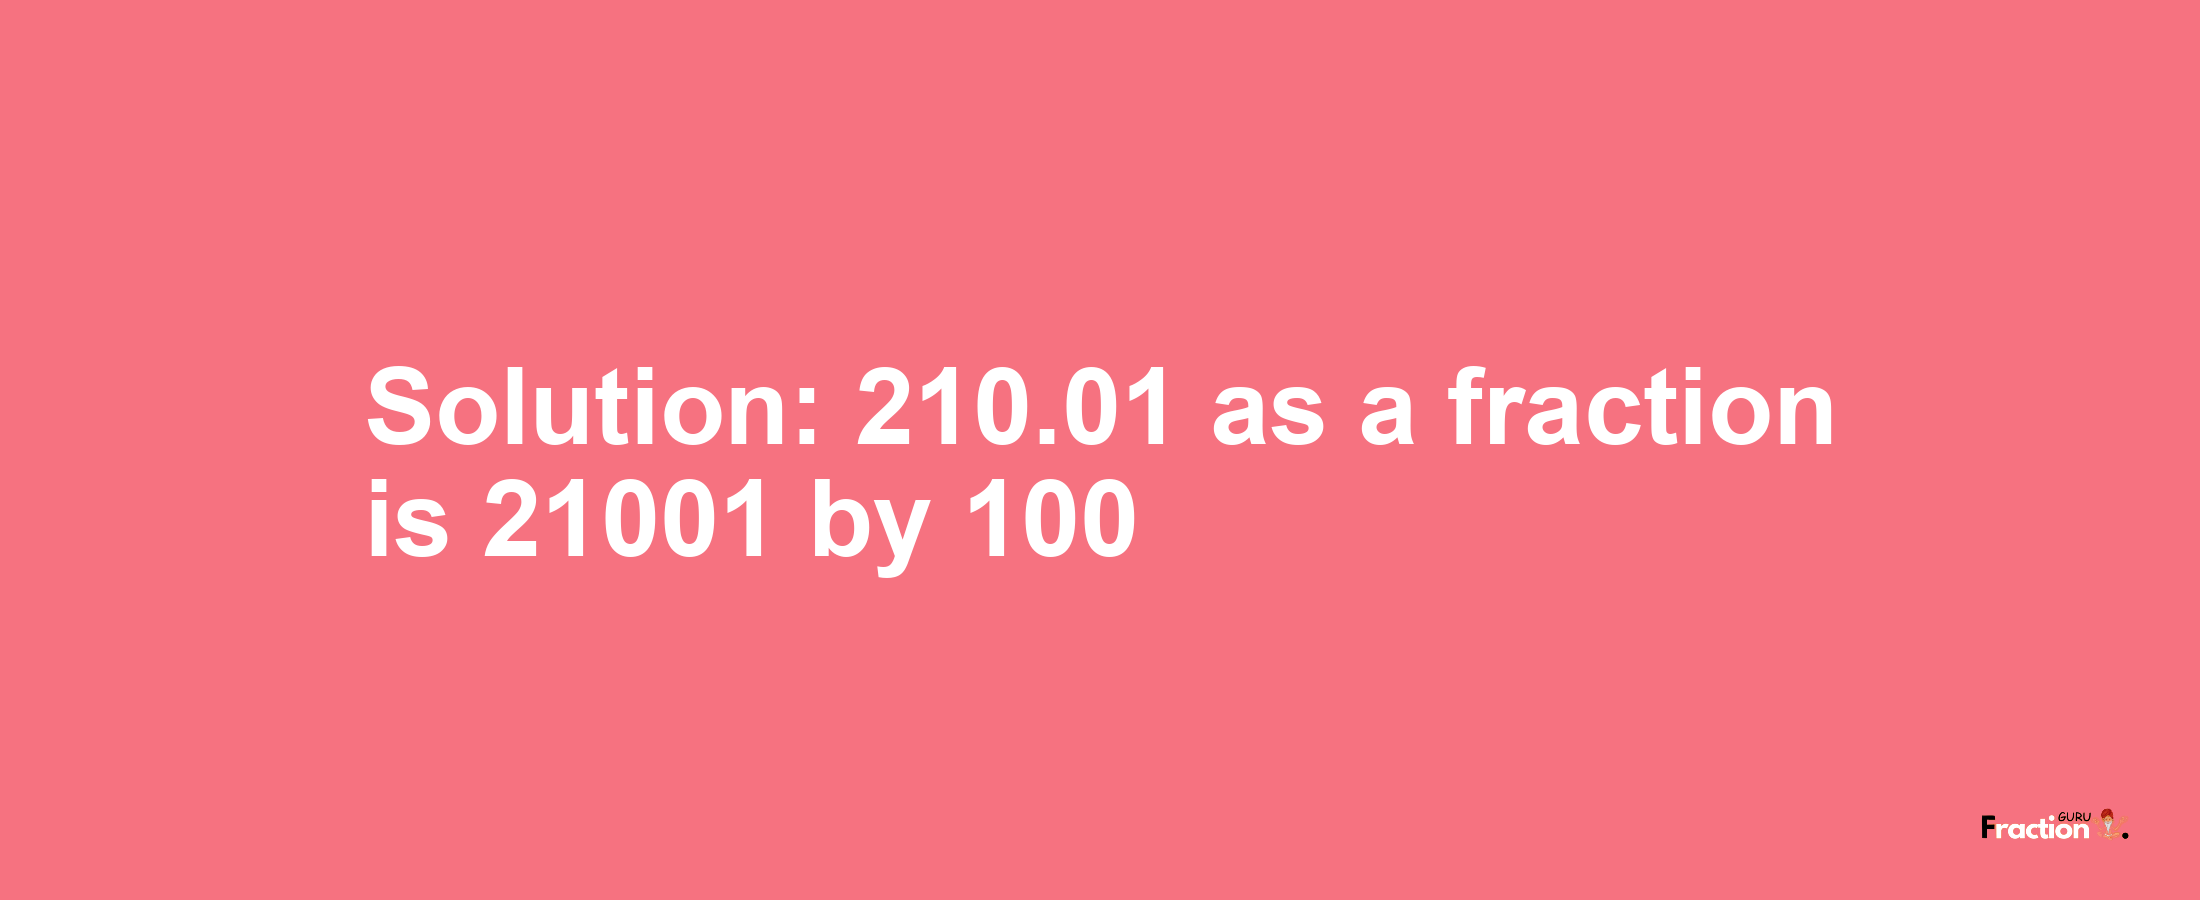 Solution:210.01 as a fraction is 21001/100